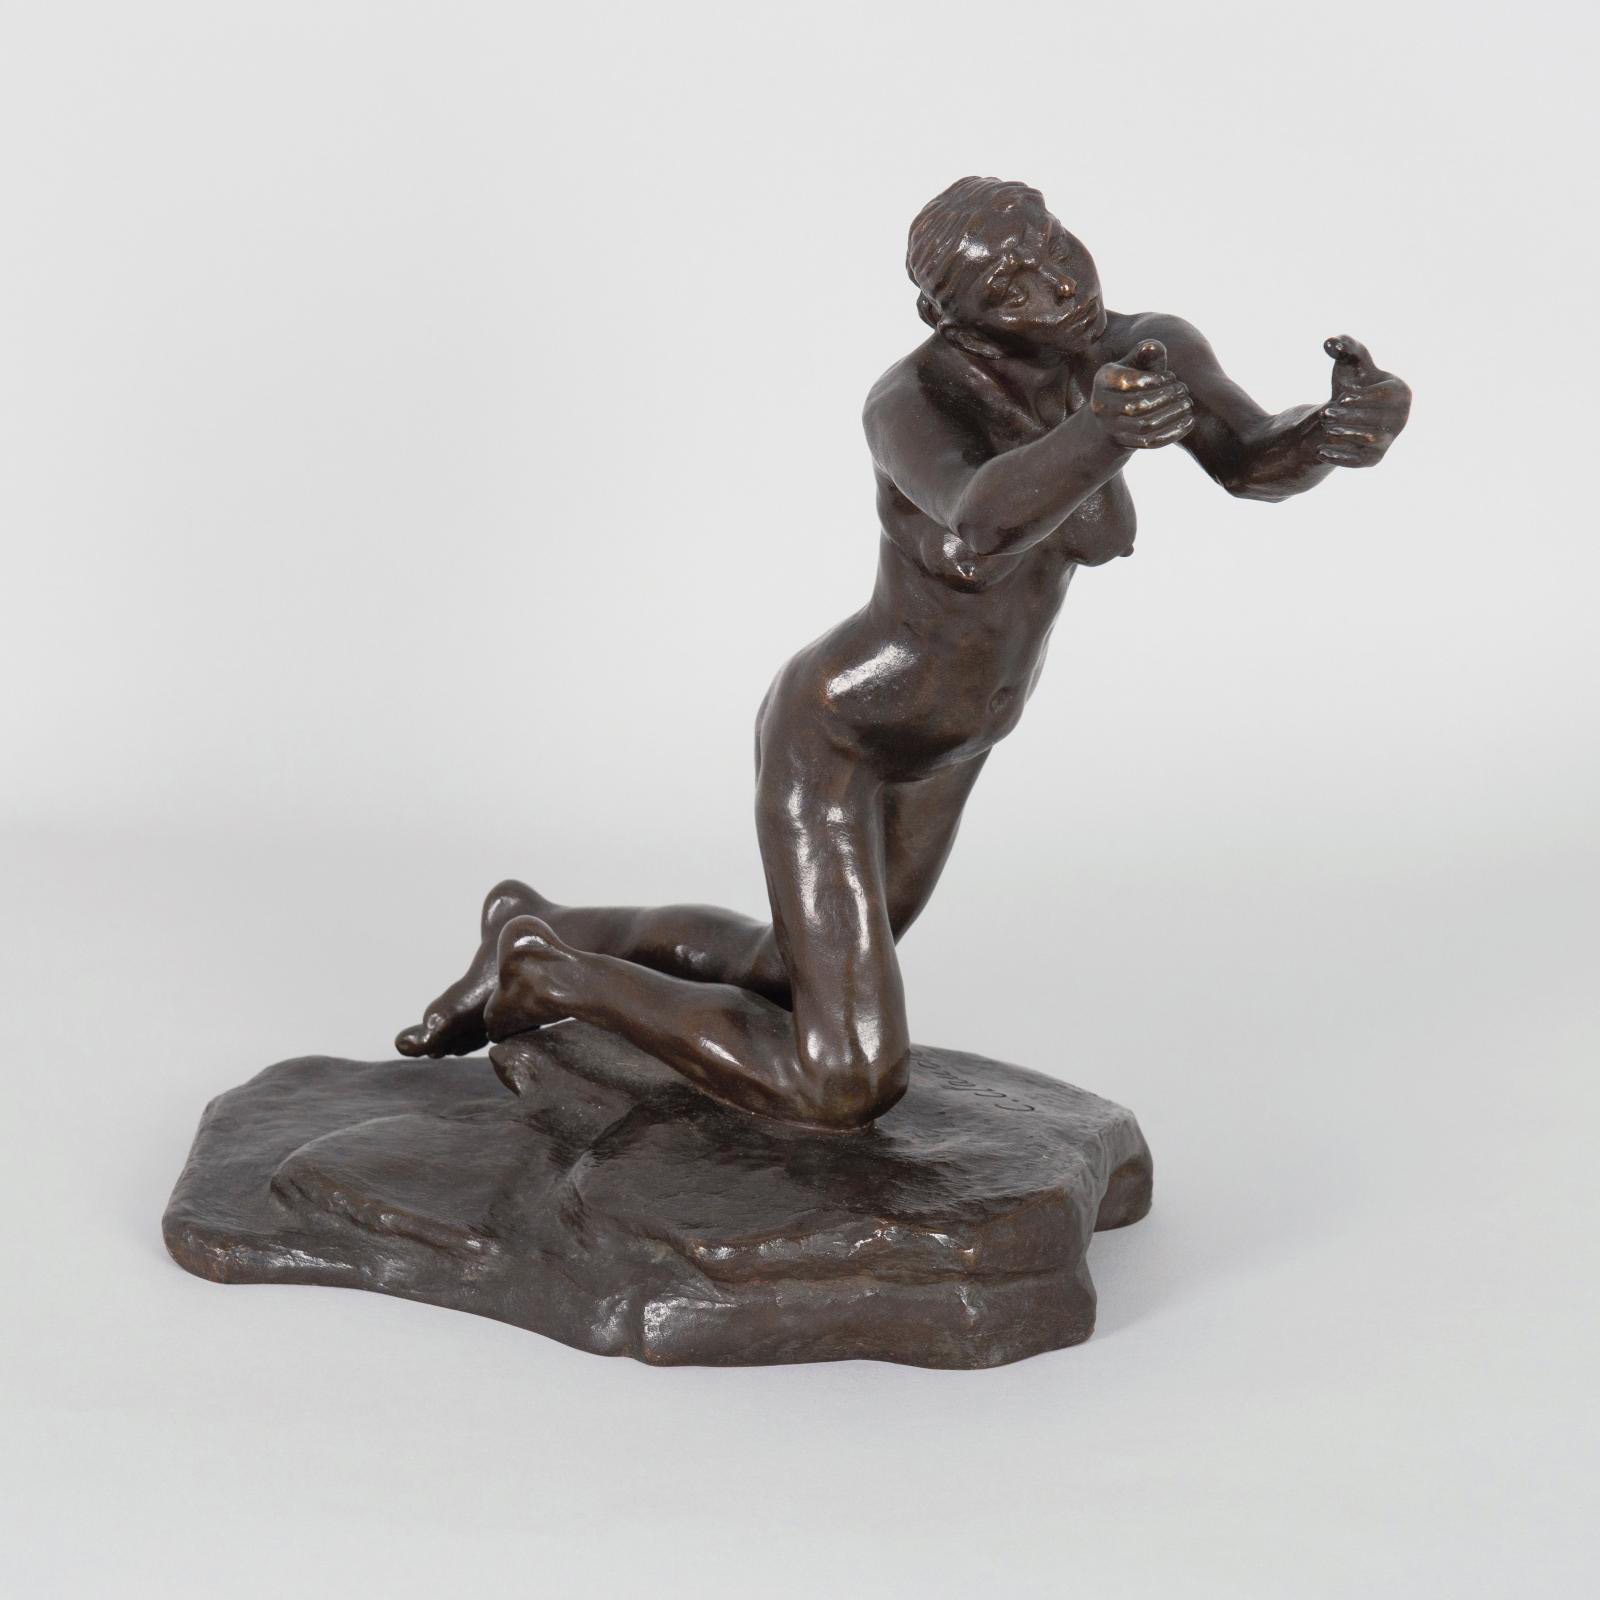 An Iconic Work by Camille Claudel